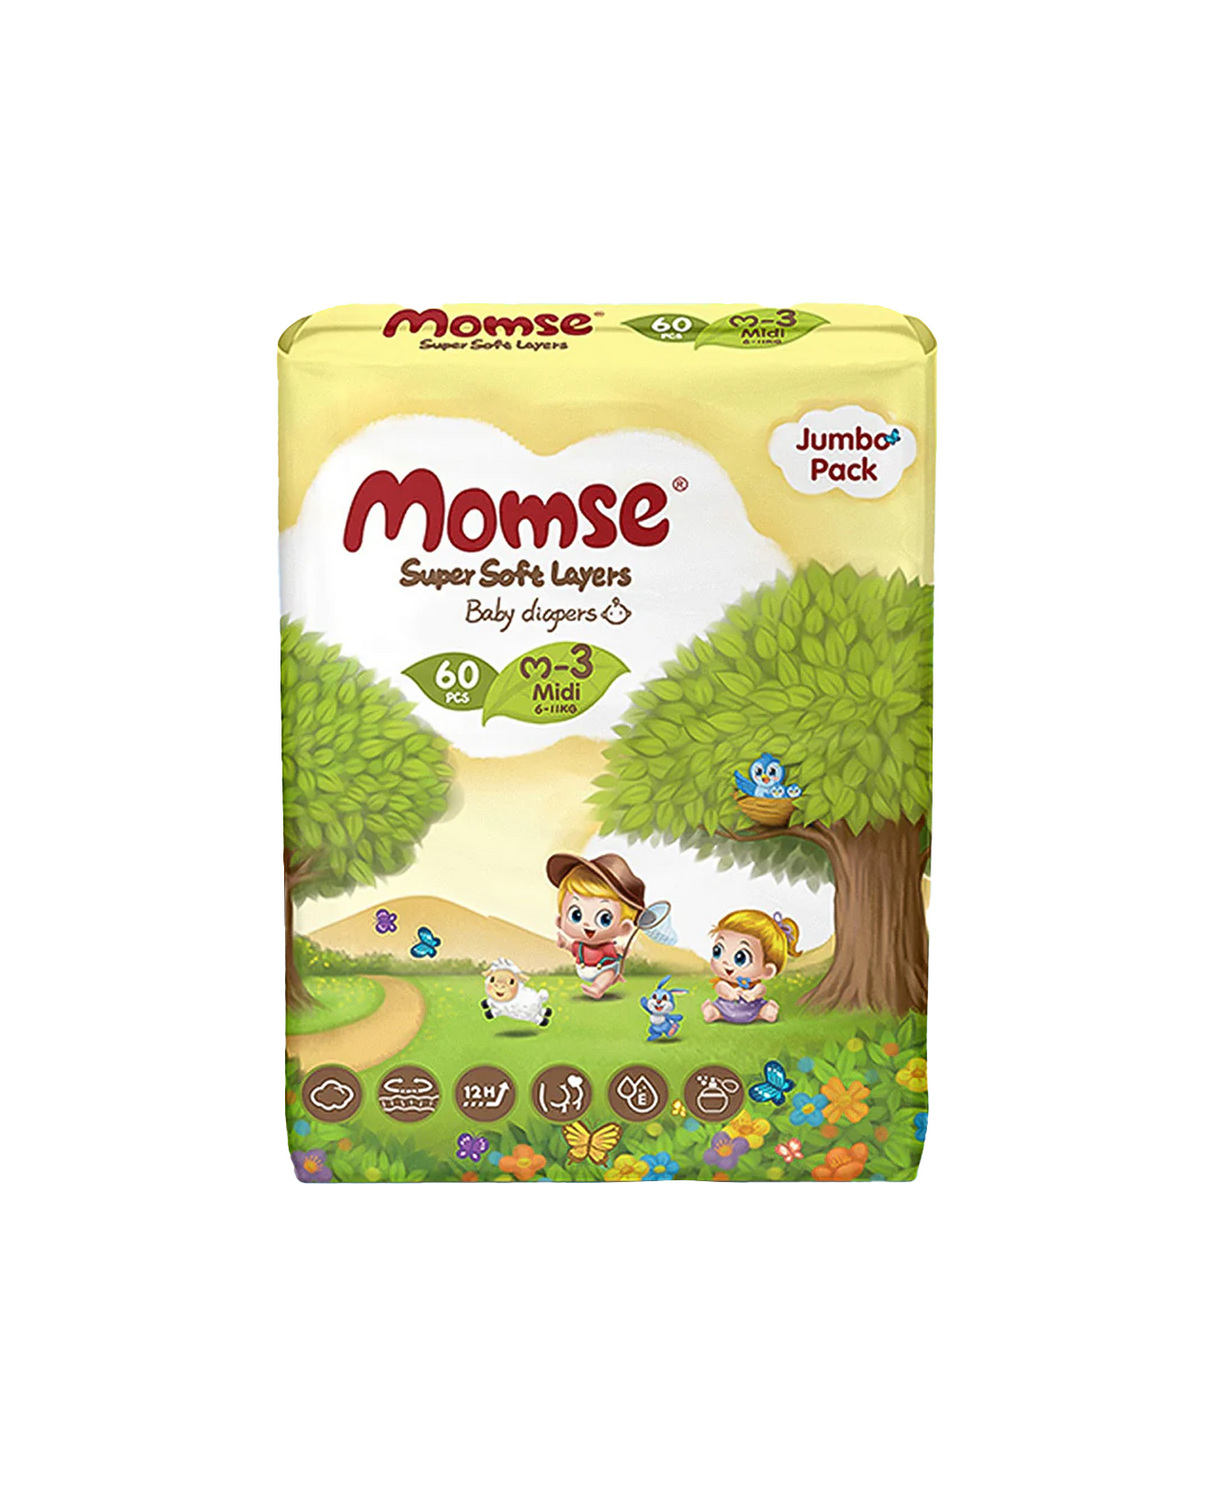 momse diapers jumbo pack m-3 60pc